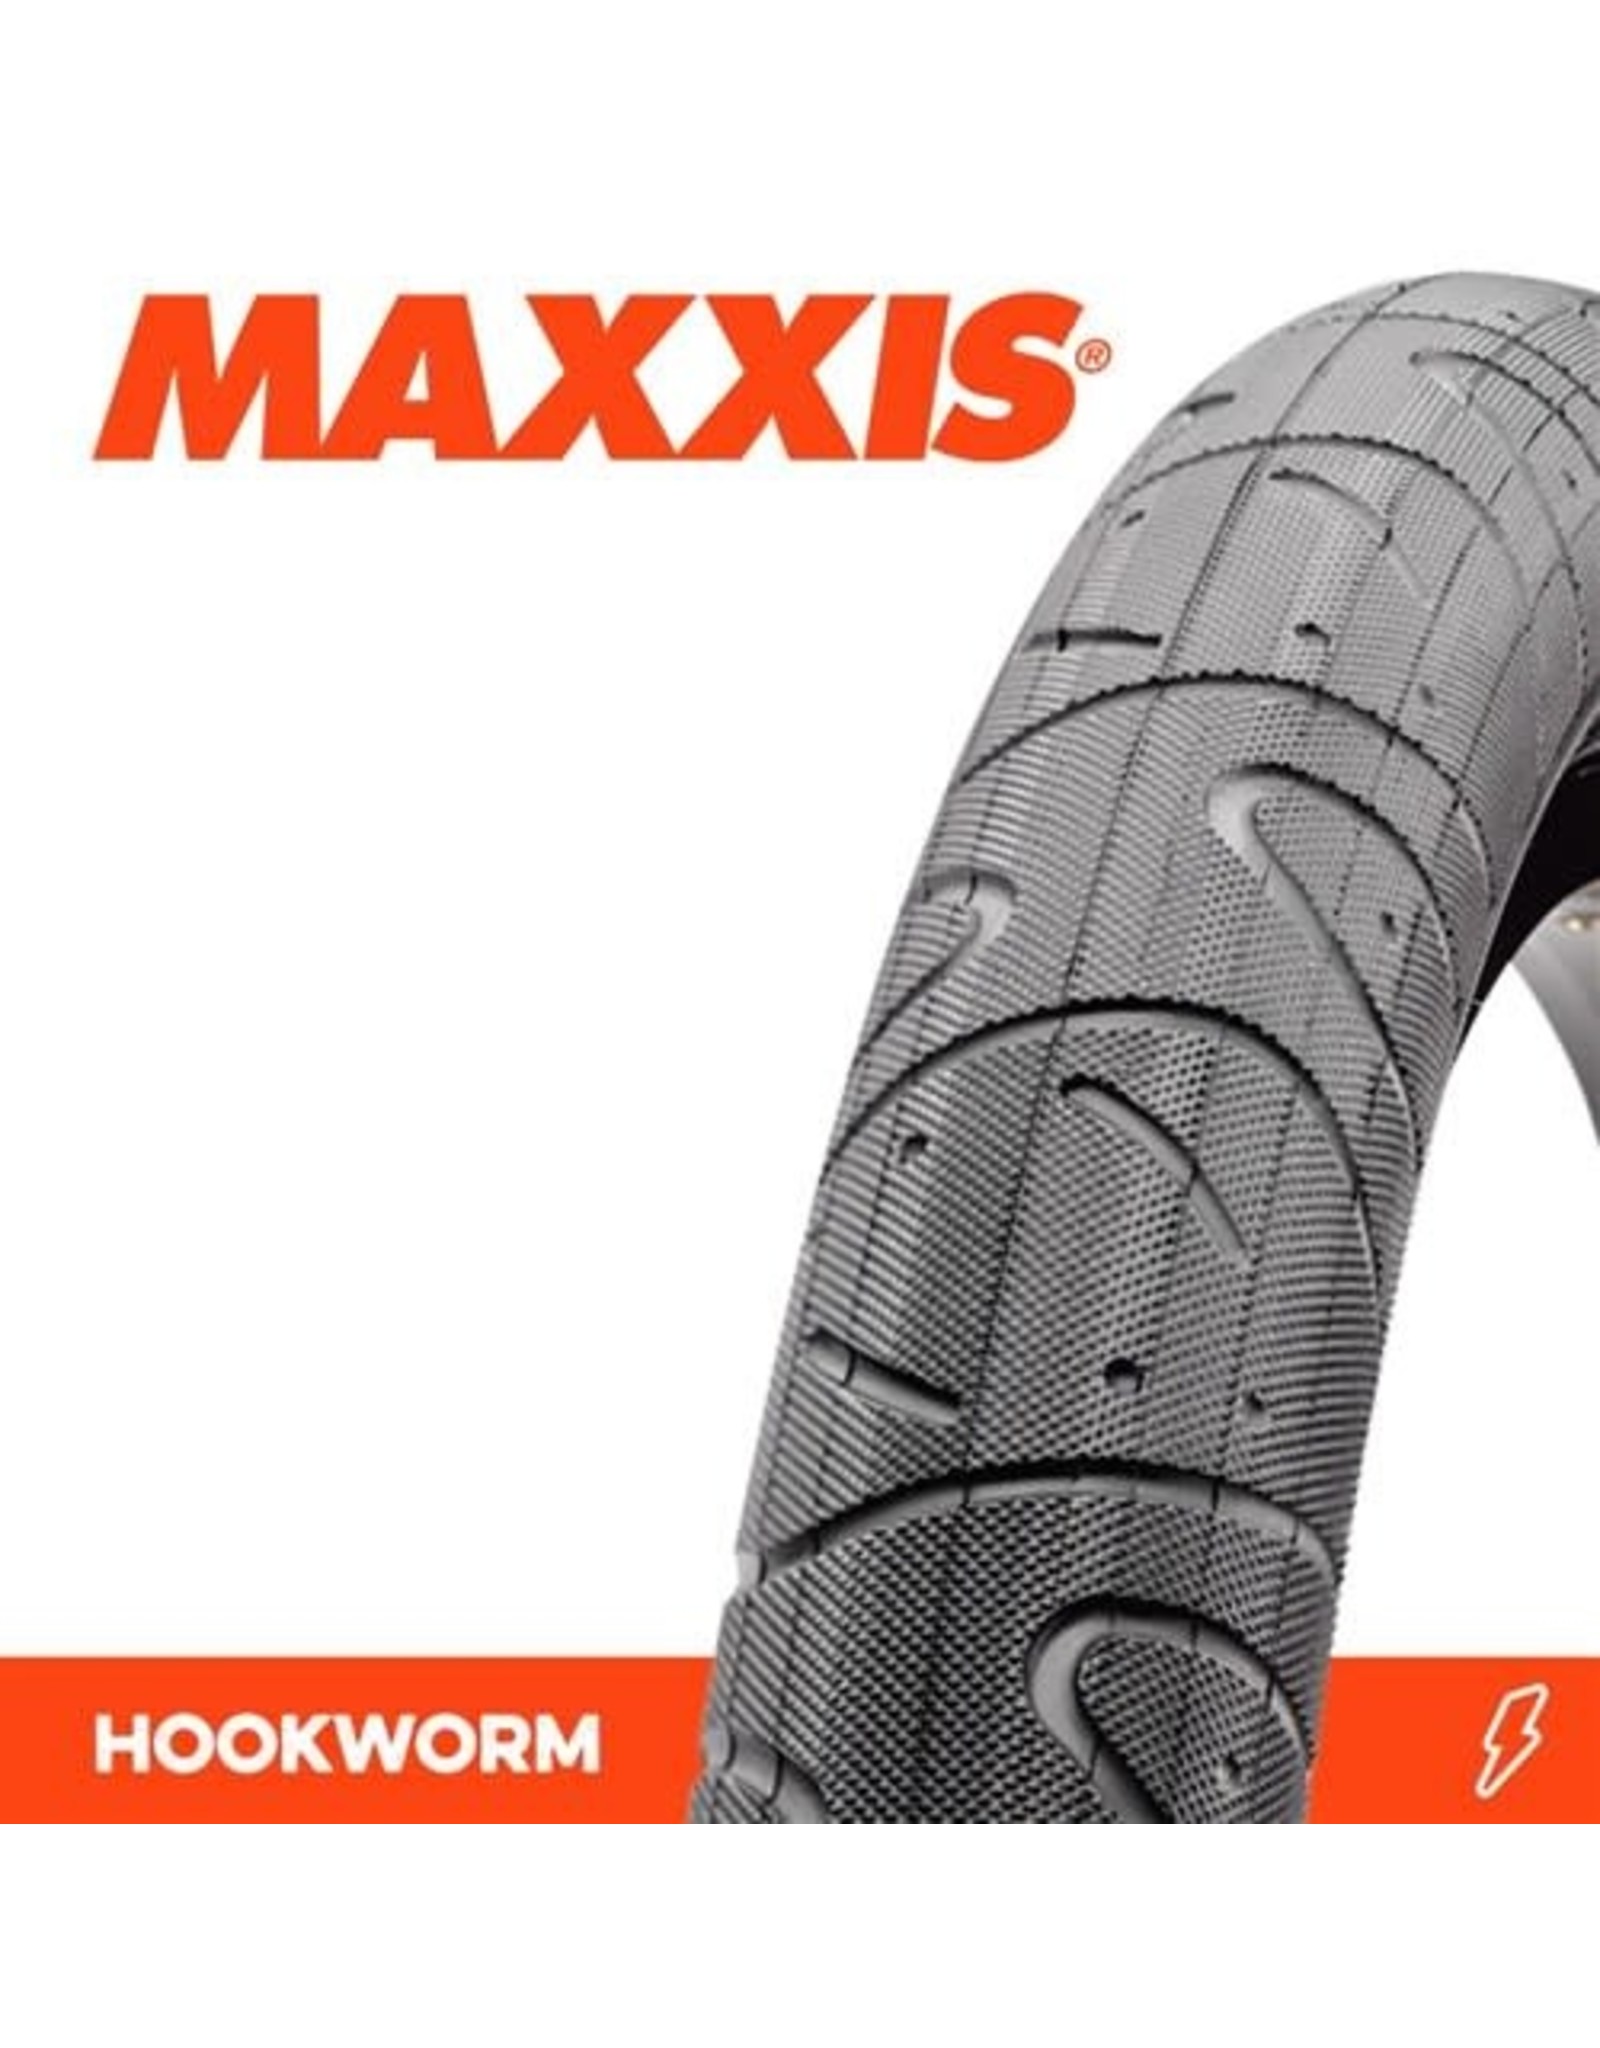 MAXXIS MAXXIS HOOKWORM 29 X 2.50” WIRE TYRE 60TPI